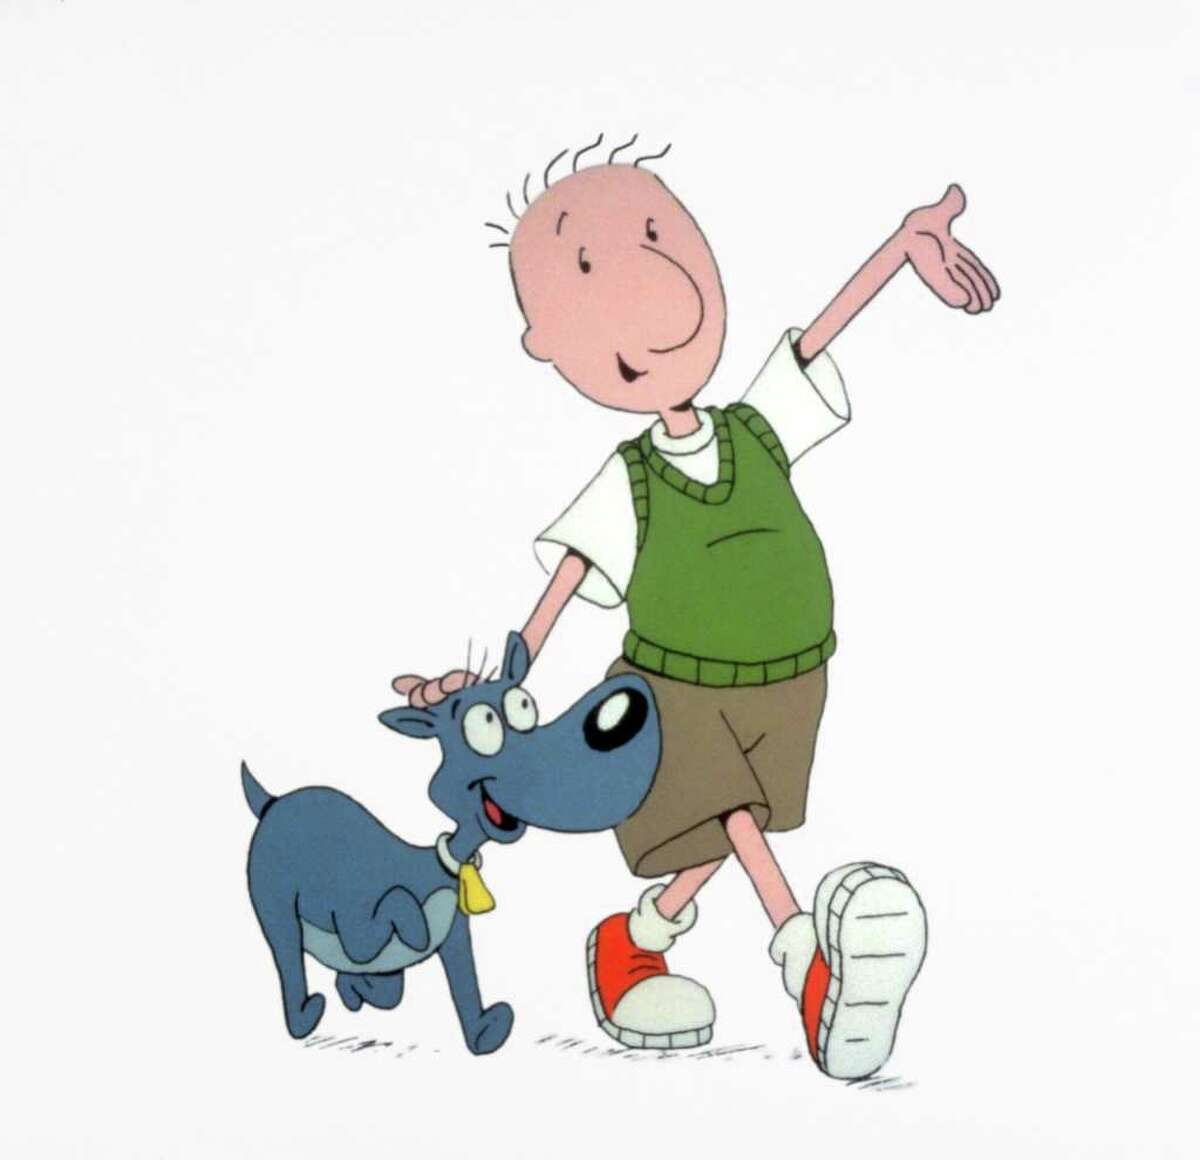 Nickelodeon REMEMBER WHEN: Doug Funnie in Doug, part of TeenNick's The '90s Are All That programming block.